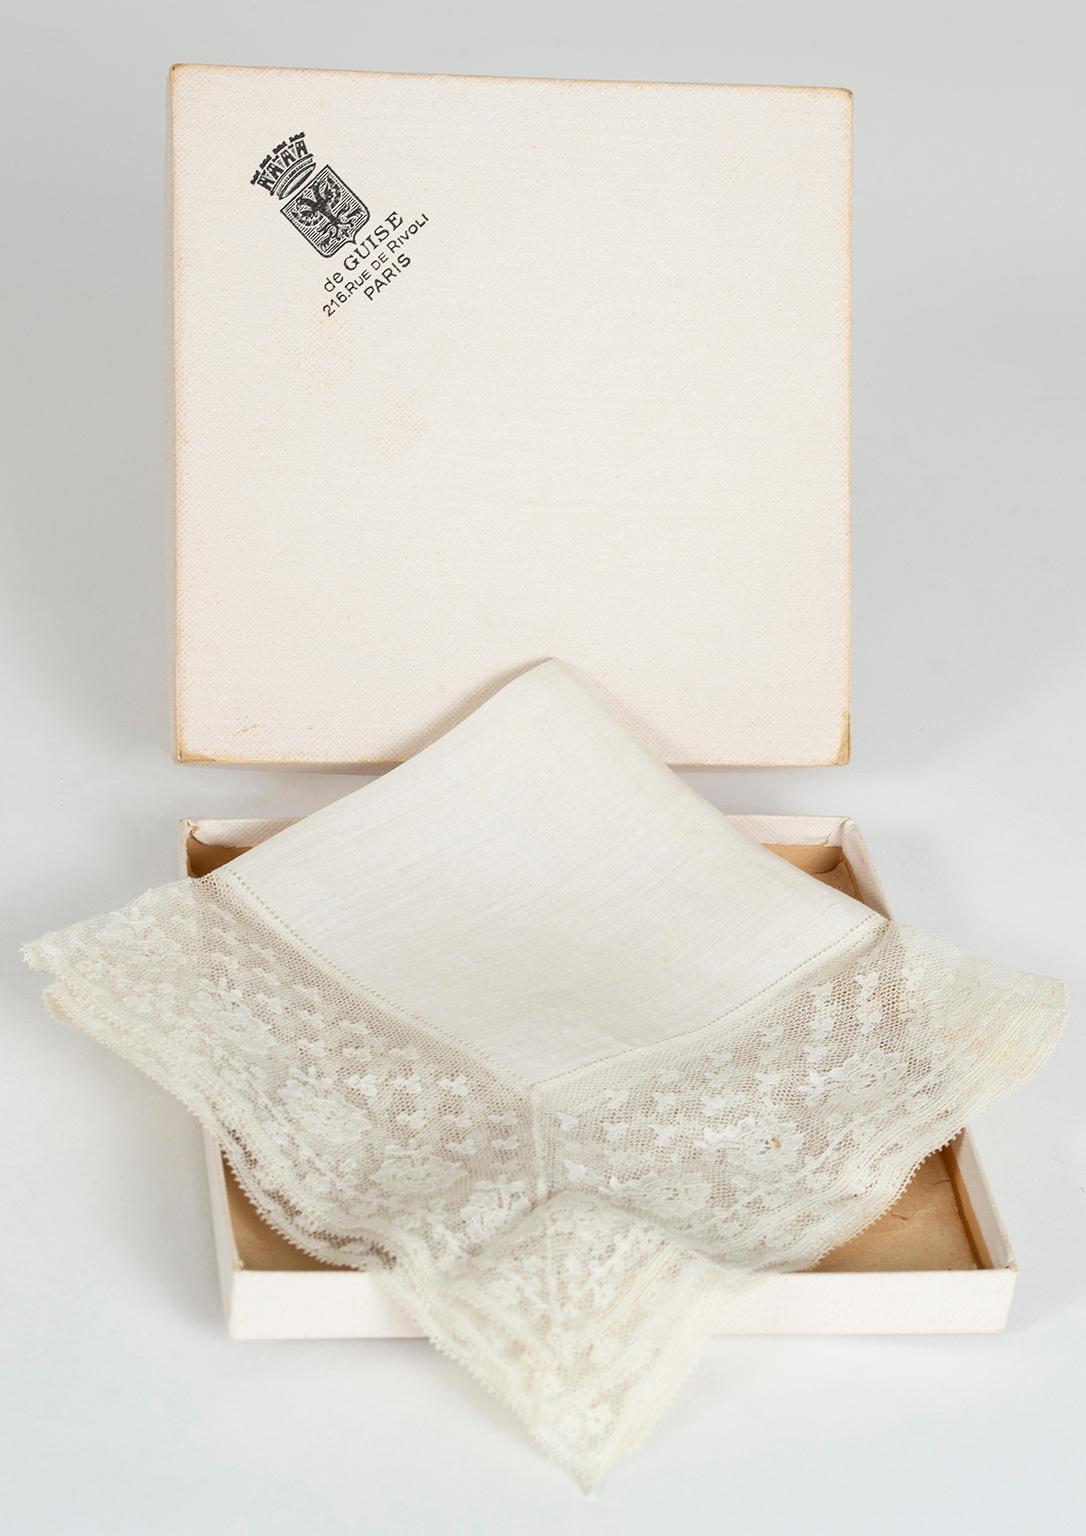 An affectionate memory of a bygone era, vintage handkerchiefs make heartfelt gifts appropriate for almost any occasion. This exceptional example was a gift from a member of the Nixon State Department to his French-Spanish wife in 1953.

Single linen